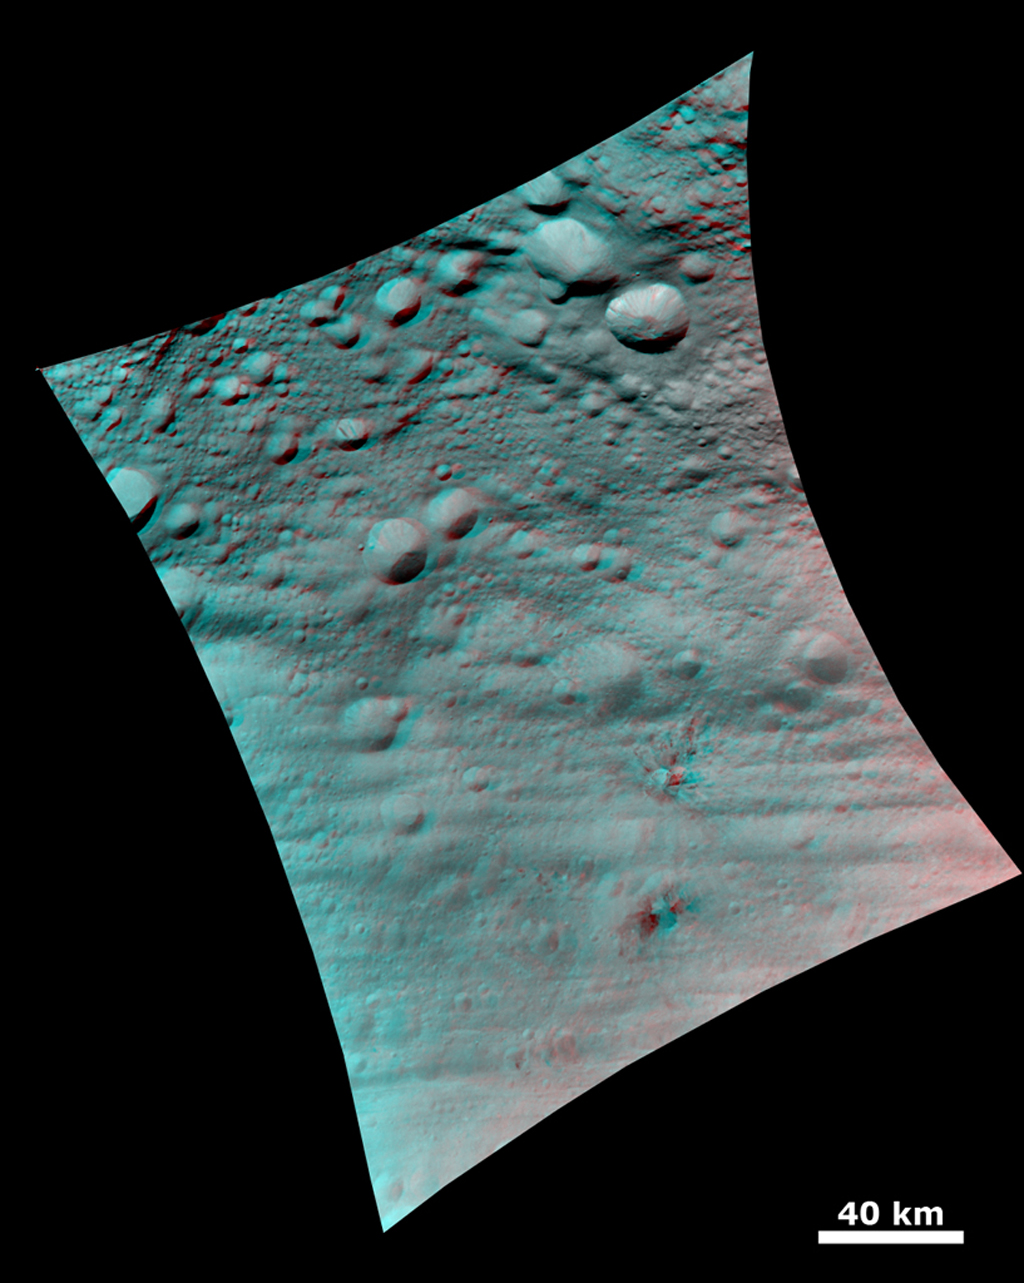 Topography of Densely Cratered Deformed Terrain